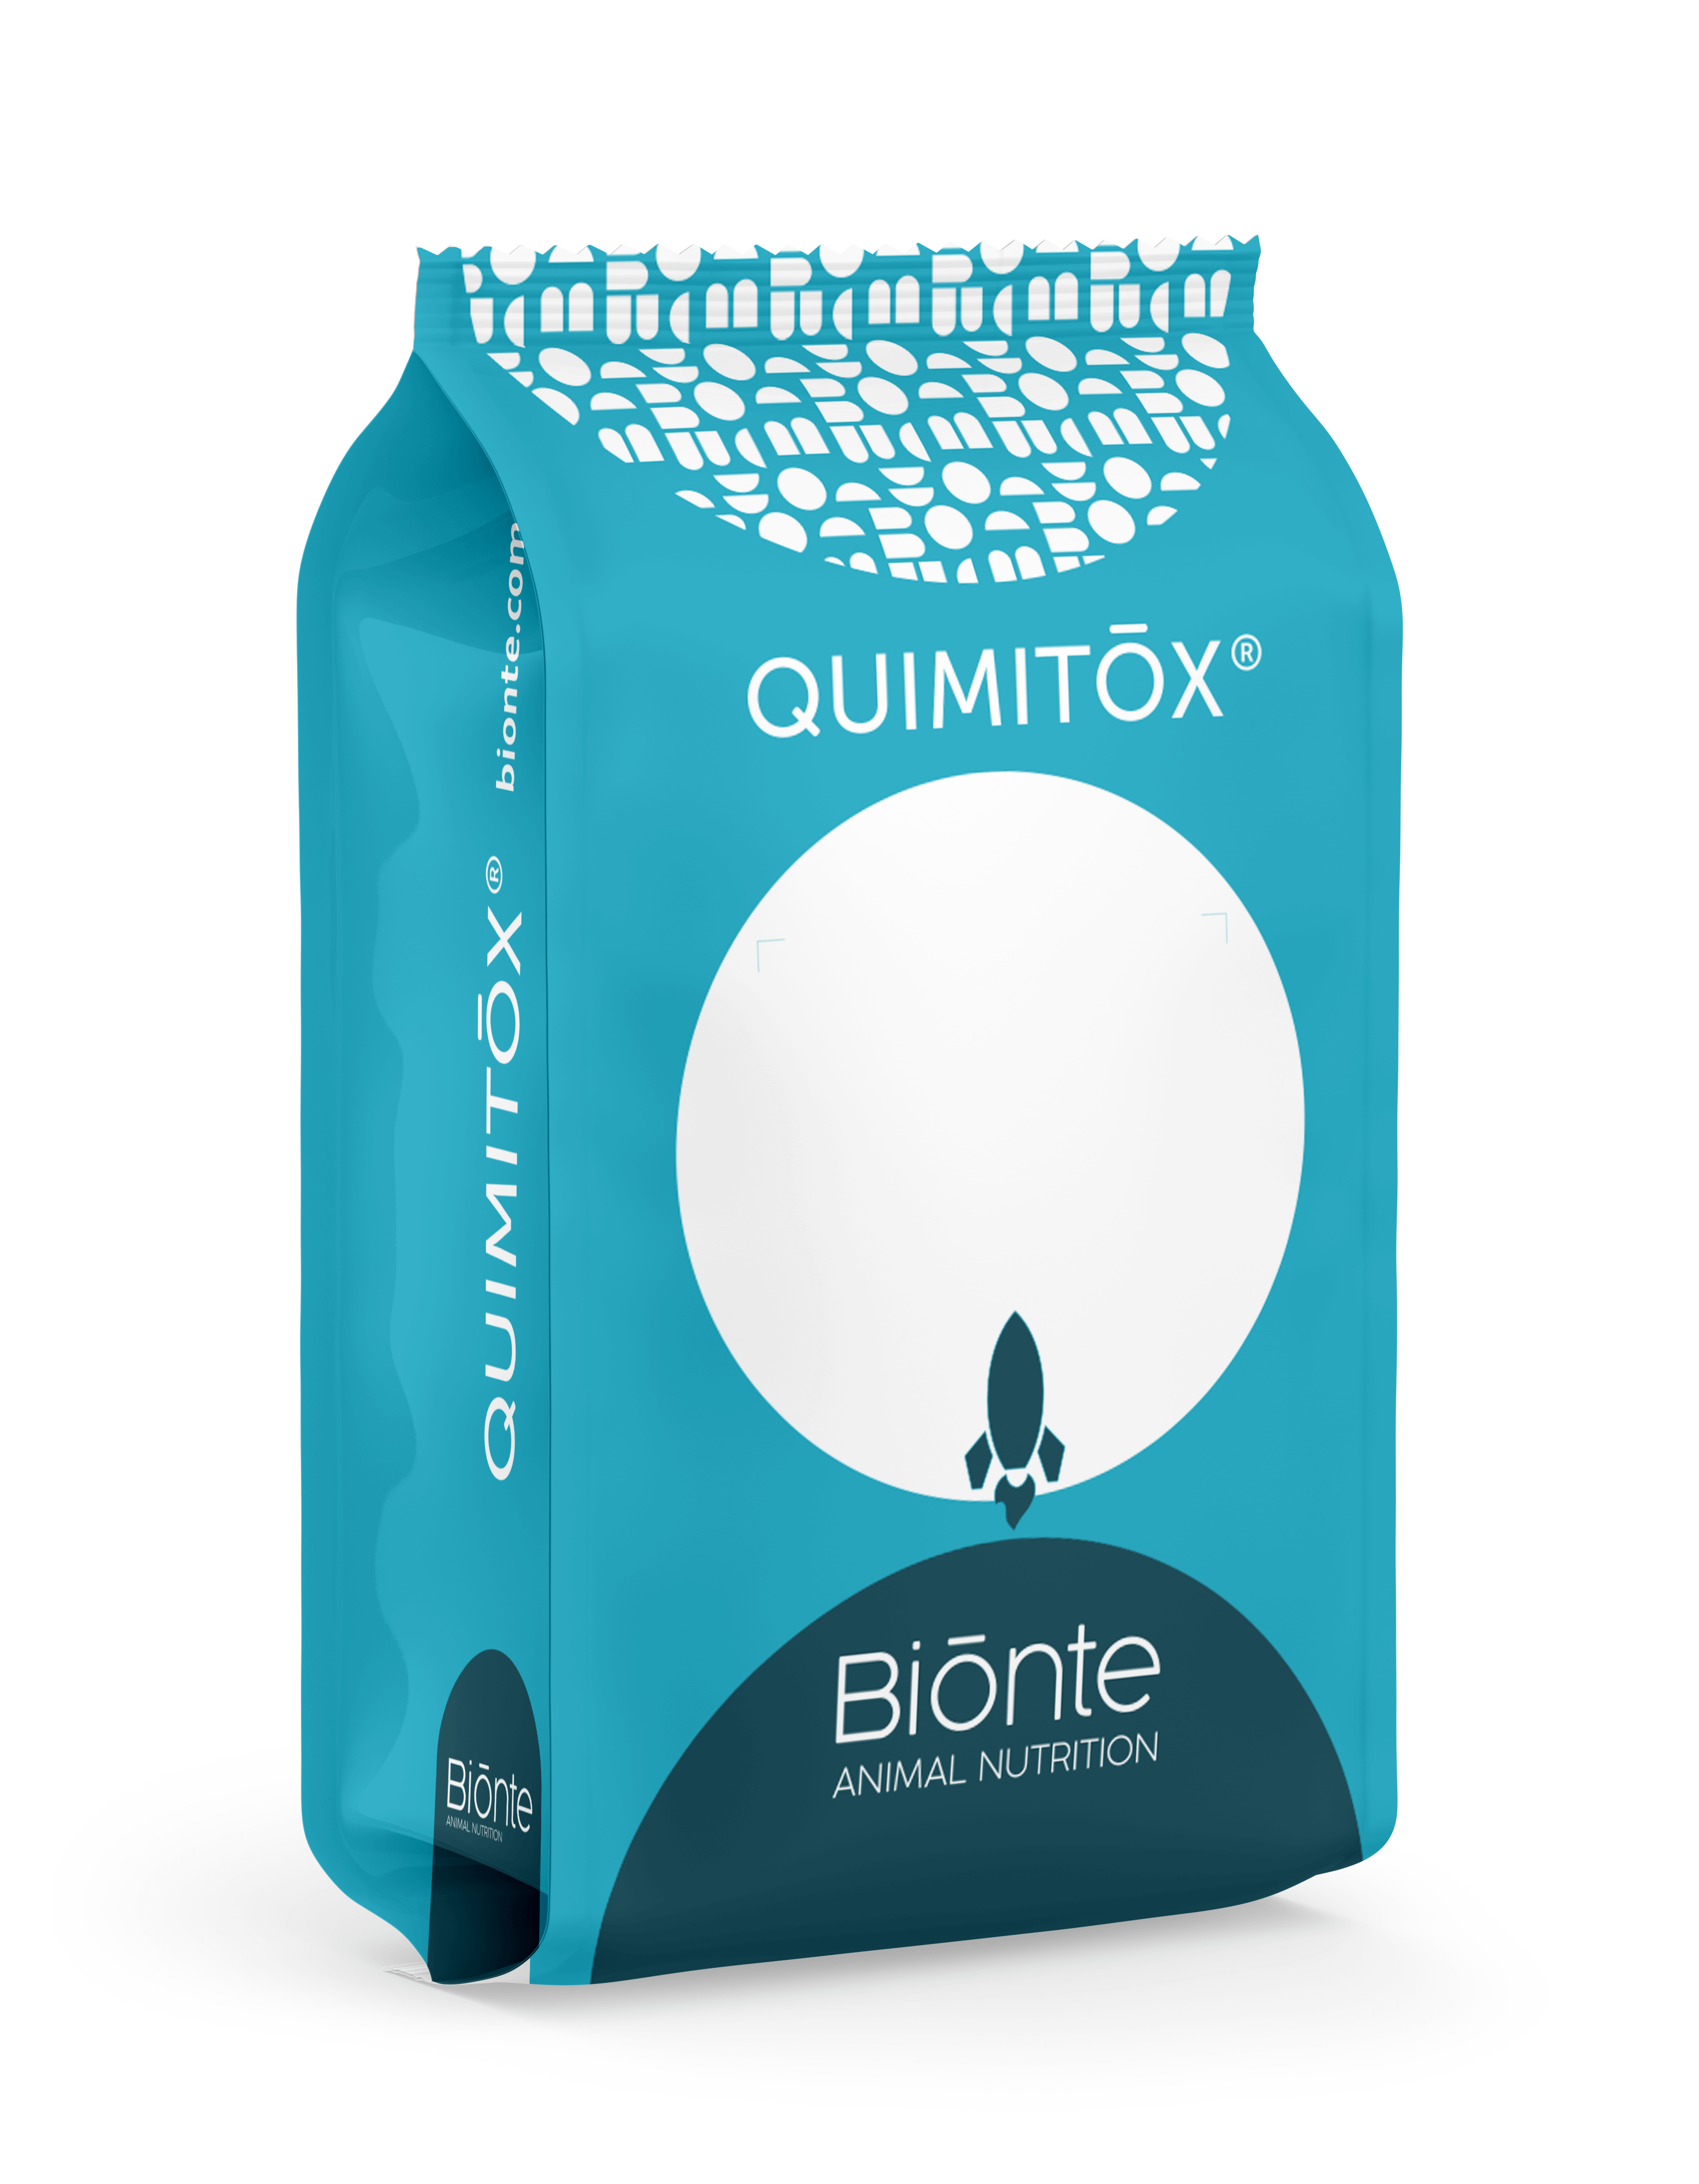 Mock-up-quimitox-bionte